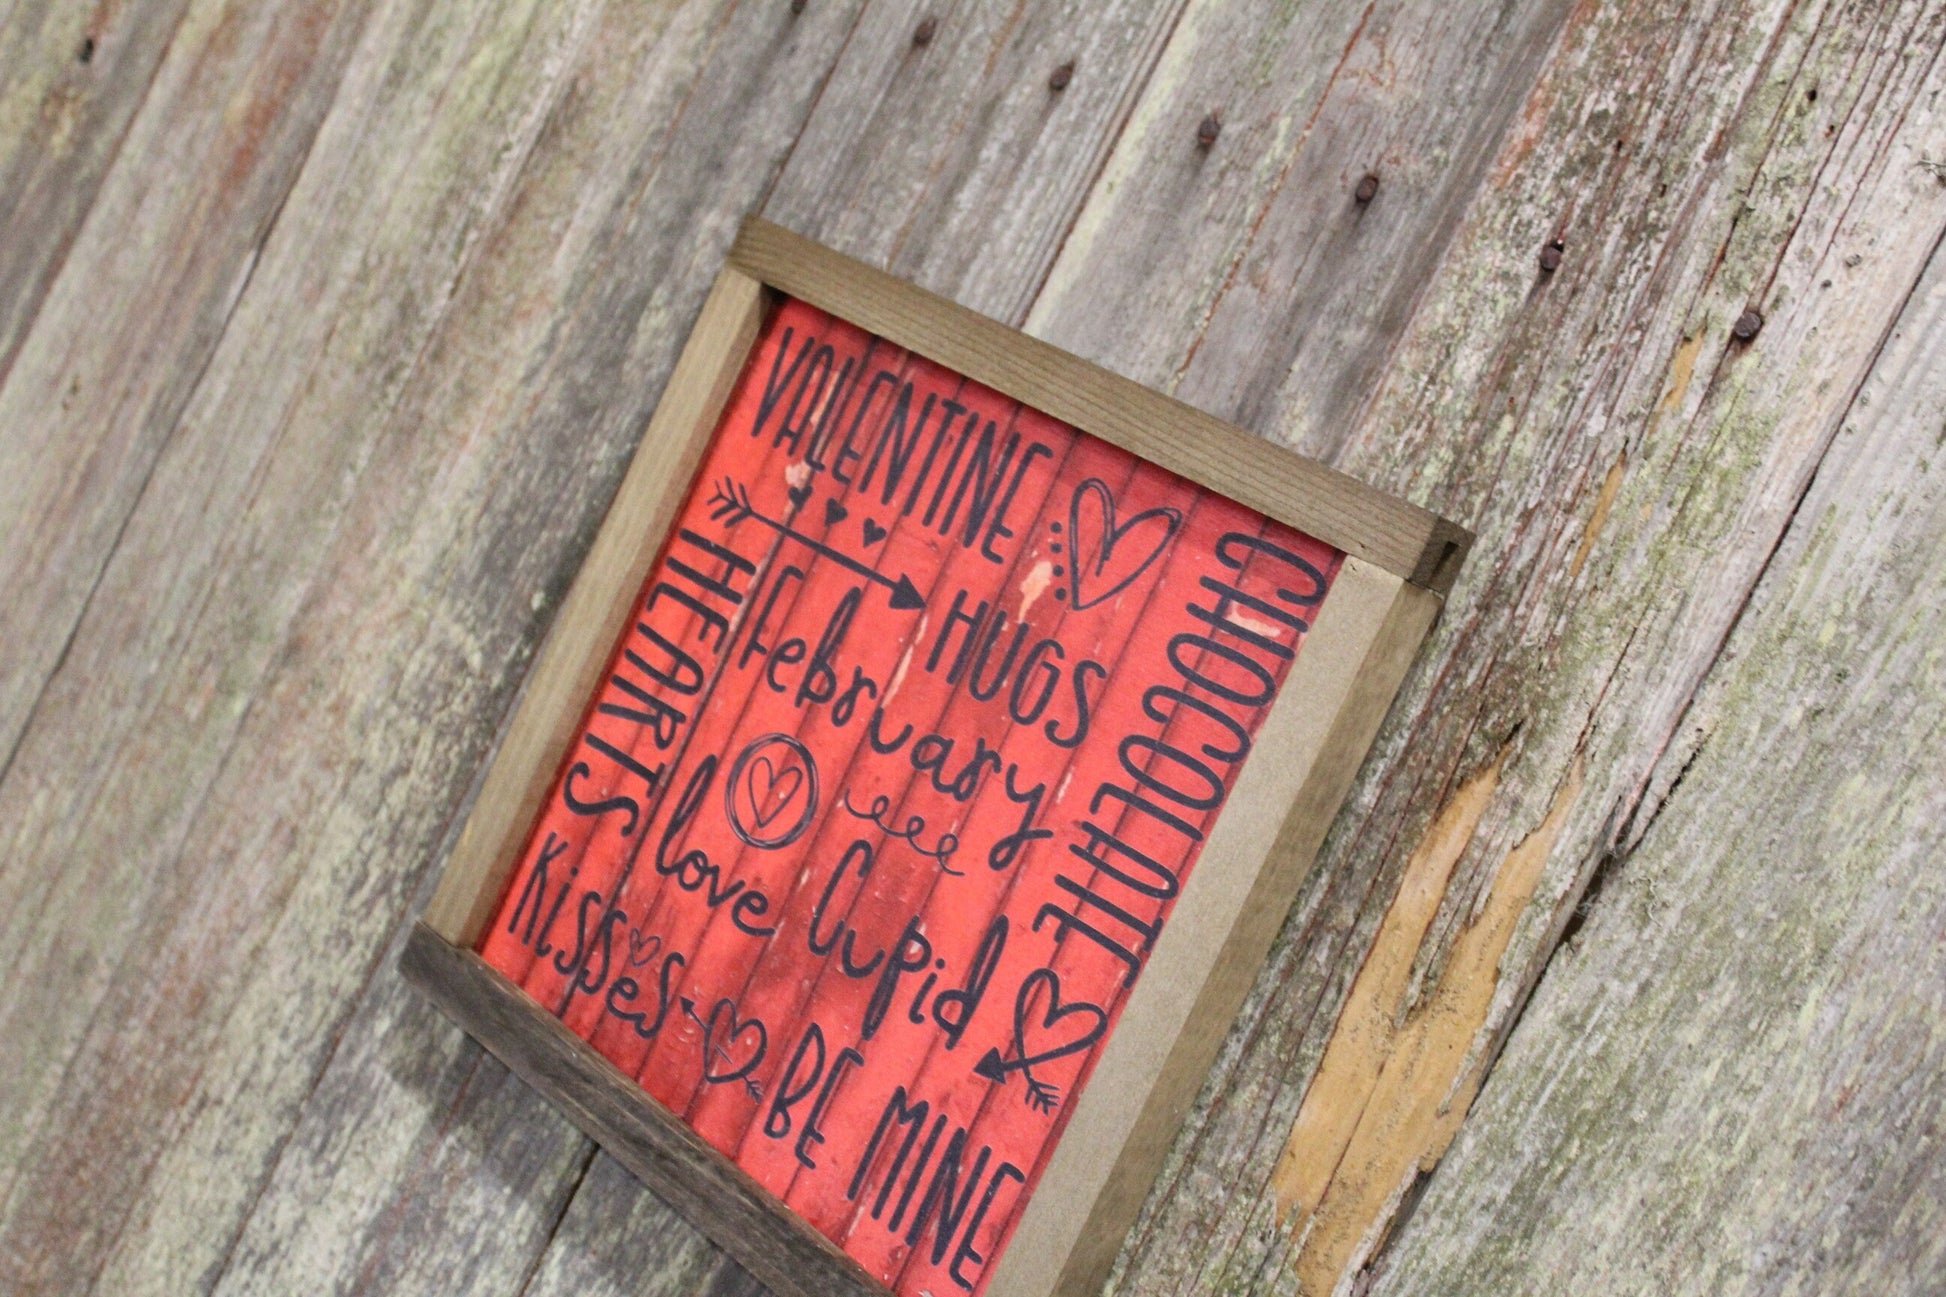 Valentines Wood Sign XOXO Text February Kiss Hug Phrases Heart Sweetest Day Valentines Day Red Shiplap Print Art Farmhouse Primitive Rustic